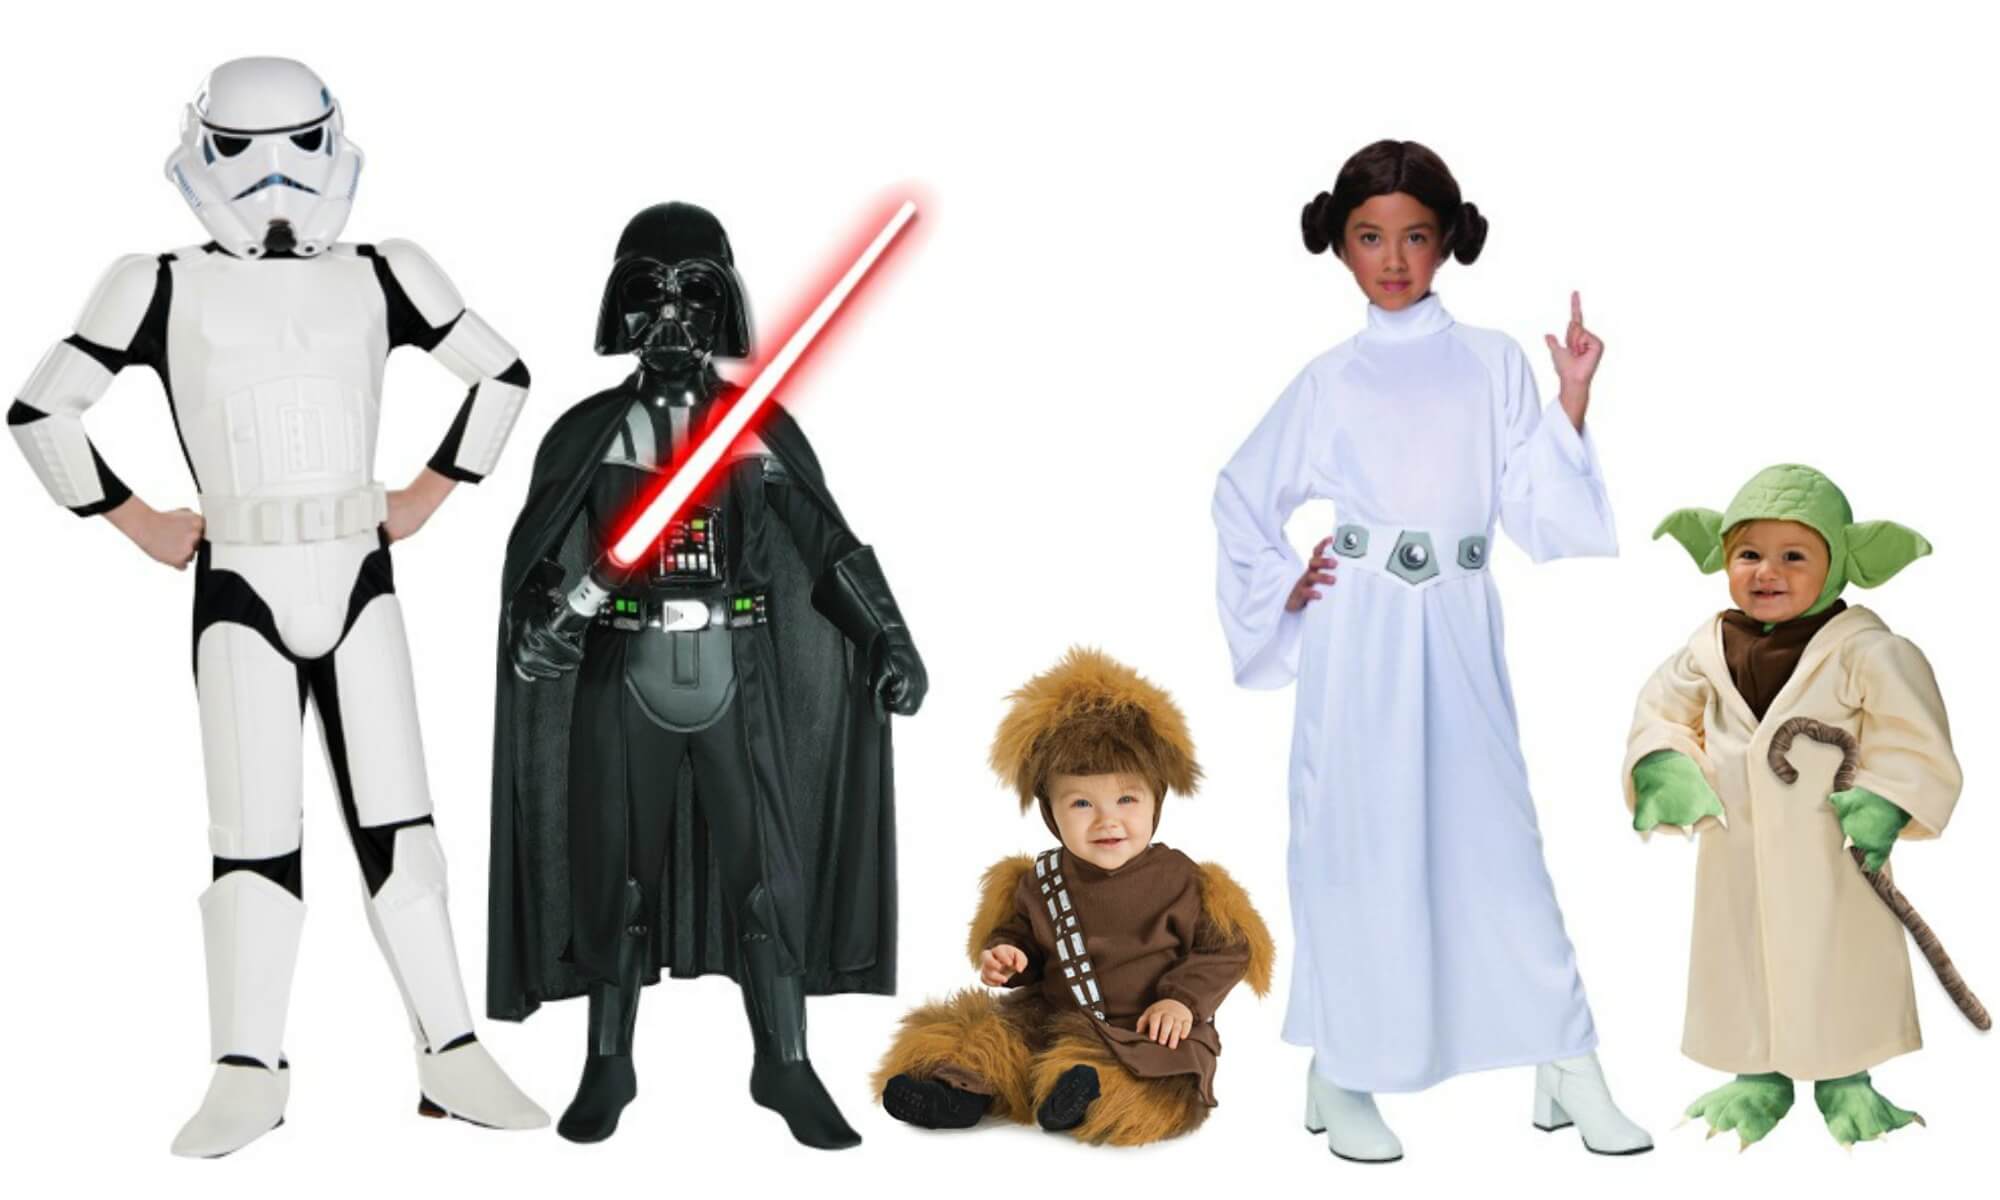 Star Wars costumes for kids